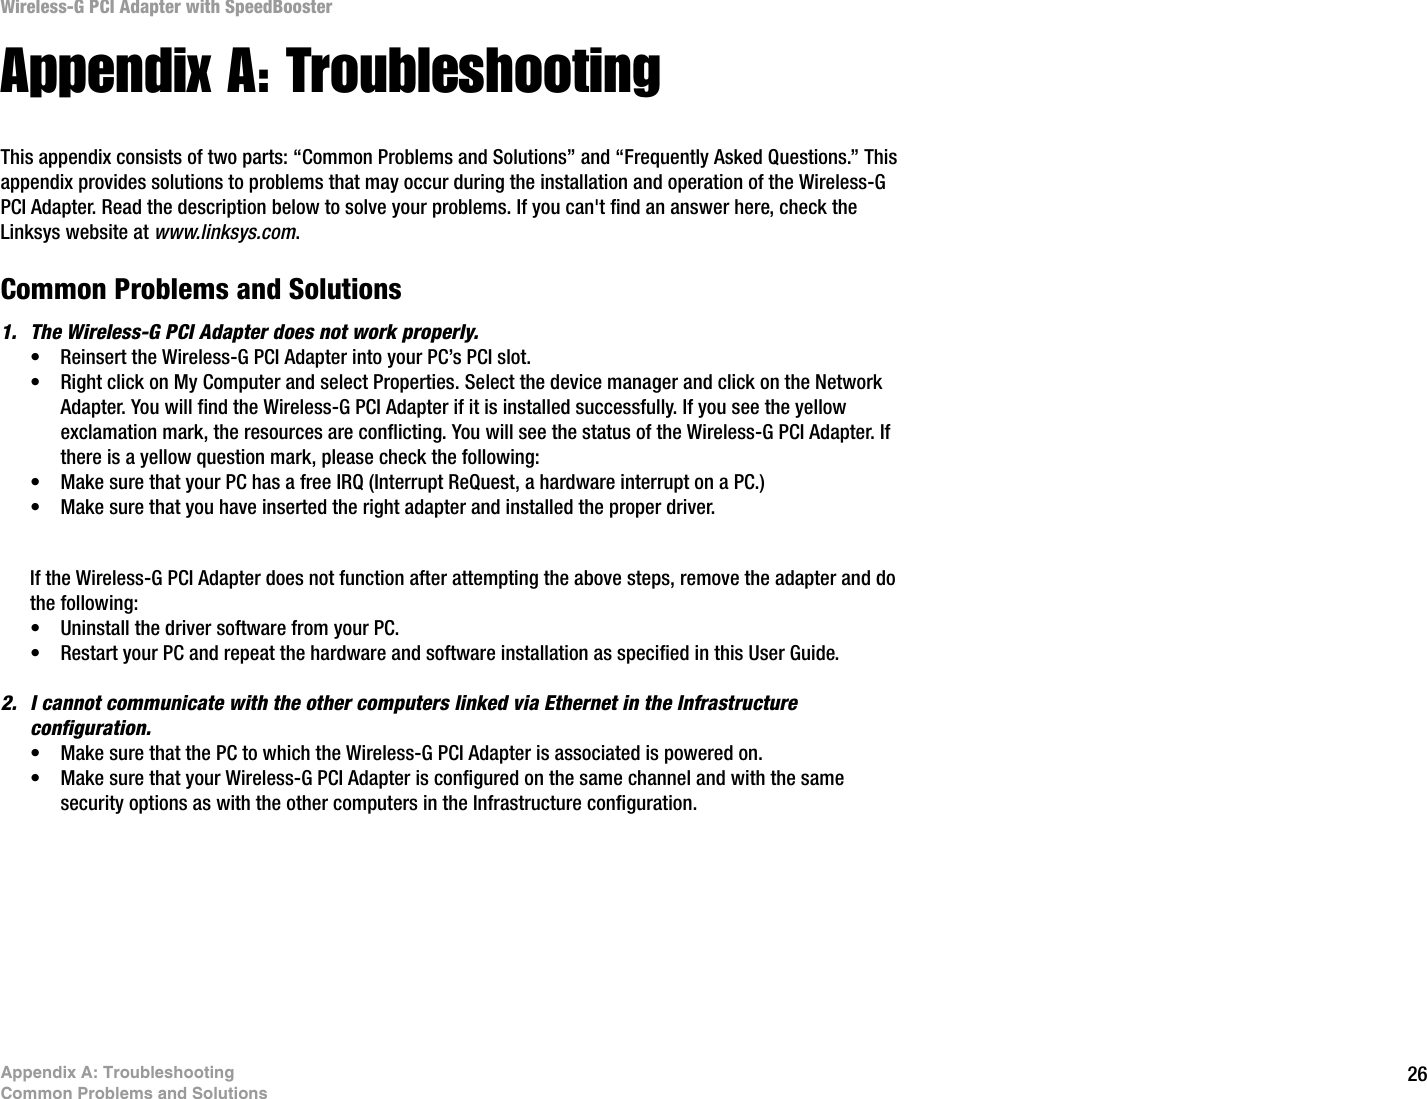 26Appendix A: TroubleshootingCommon Problems and SolutionsWireless-G PCI Adapter with SpeedBoosterAppendix A: TroubleshootingThis appendix consists of two parts: “Common Problems and Solutions” and “Frequently Asked Questions.” This appendix provides solutions to problems that may occur during the installation and operation of the Wireless-G PCI Adapter. Read the description below to solve your problems. If you can&apos;t find an answer here, check the Linksys website at www.linksys.com.Common Problems and Solutions1. The Wireless-G PCI Adapter does not work properly.• Reinsert the Wireless-G PCI Adapter into your PC’s PCI slot.• Right click on My Computer and select Properties. Select the device manager and click on the Network Adapter. You will find the Wireless-G PCI Adapter if it is installed successfully. If you see the yellow exclamation mark, the resources are conflicting. You will see the status of the Wireless-G PCI Adapter. If there is a yellow question mark, please check the following:• Make sure that your PC has a free IRQ (Interrupt ReQuest, a hardware interrupt on a PC.) • Make sure that you have inserted the right adapter and installed the proper driver.If the Wireless-G PCI Adapter does not function after attempting the above steps, remove the adapter and do the following:• Uninstall the driver software from your PC.• Restart your PC and repeat the hardware and software installation as specified in this User Guide.2. I cannot communicate with the other computers linked via Ethernet in the Infrastructure configuration.• Make sure that the PC to which the Wireless-G PCI Adapter is associated is powered on.• Make sure that your Wireless-G PCI Adapter is configured on the same channel and with the same security options as with the other computers in the Infrastructure configuration. 